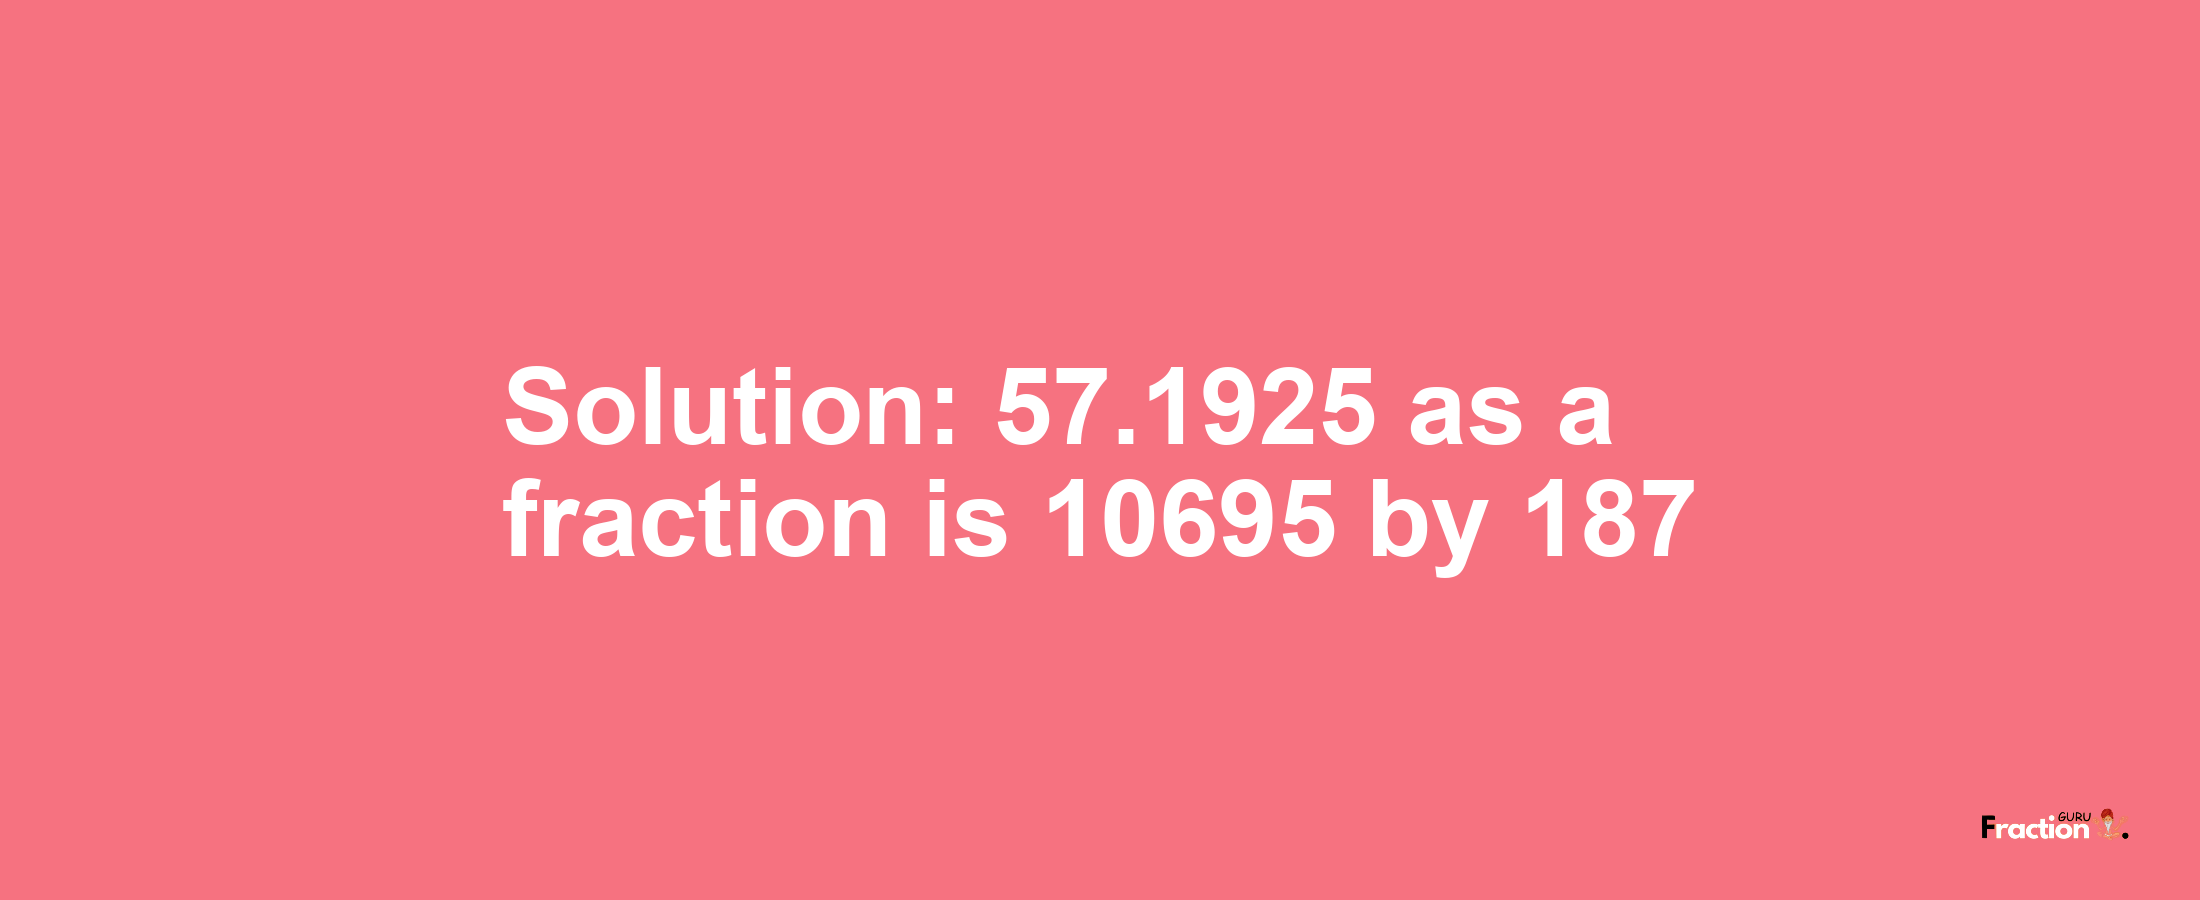 Solution:57.1925 as a fraction is 10695/187